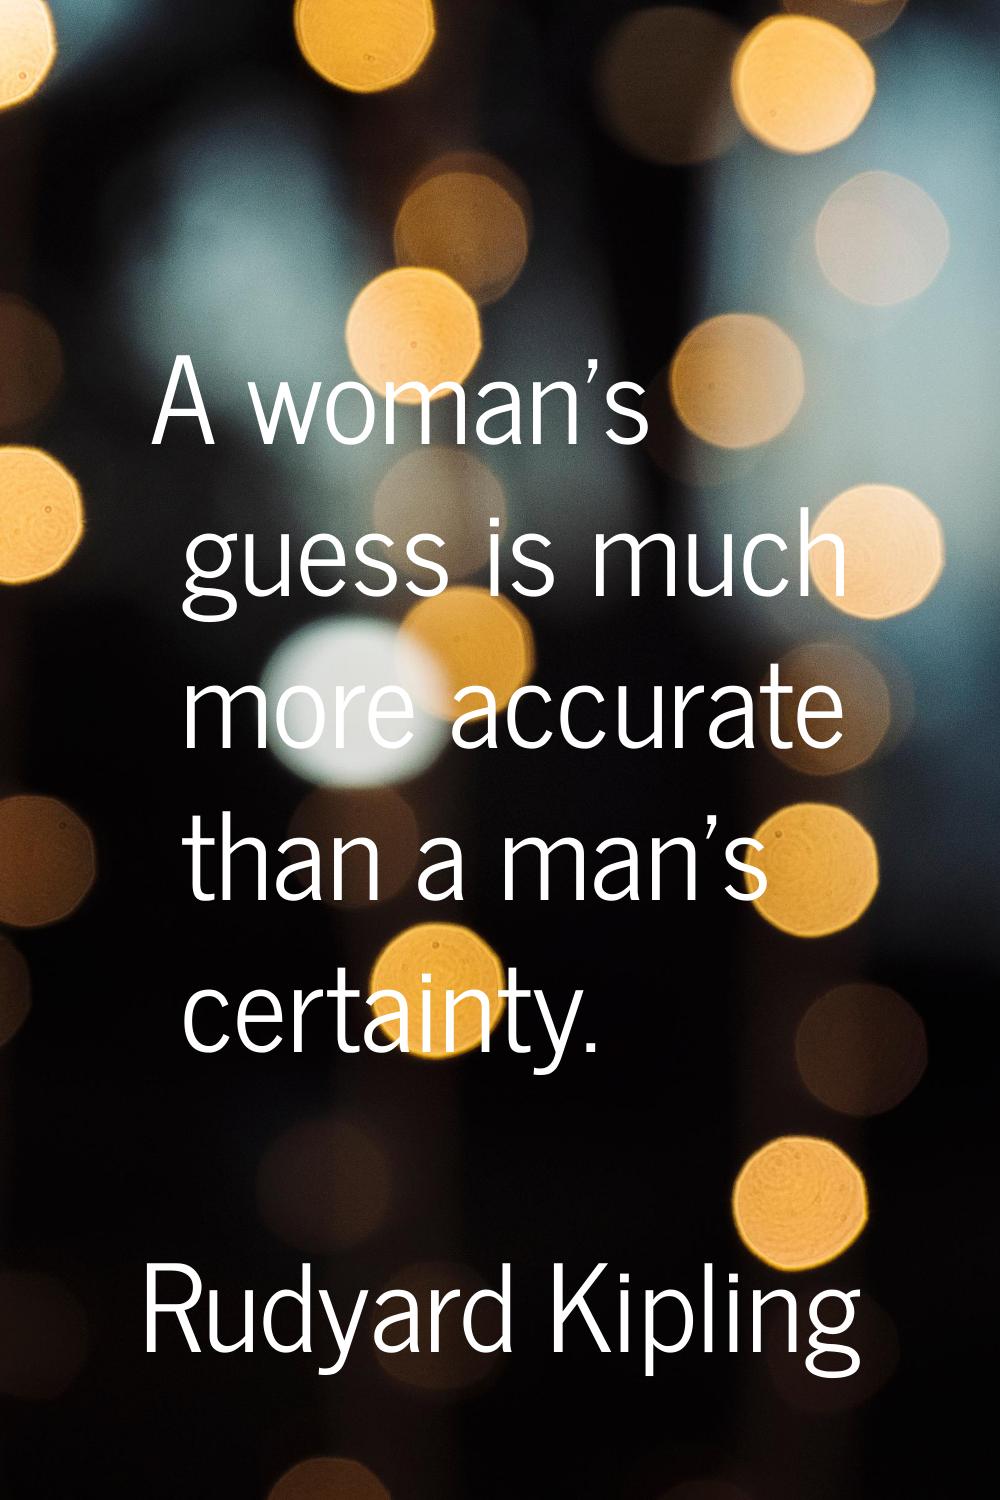 A woman's guess is much more accurate than a man's certainty.